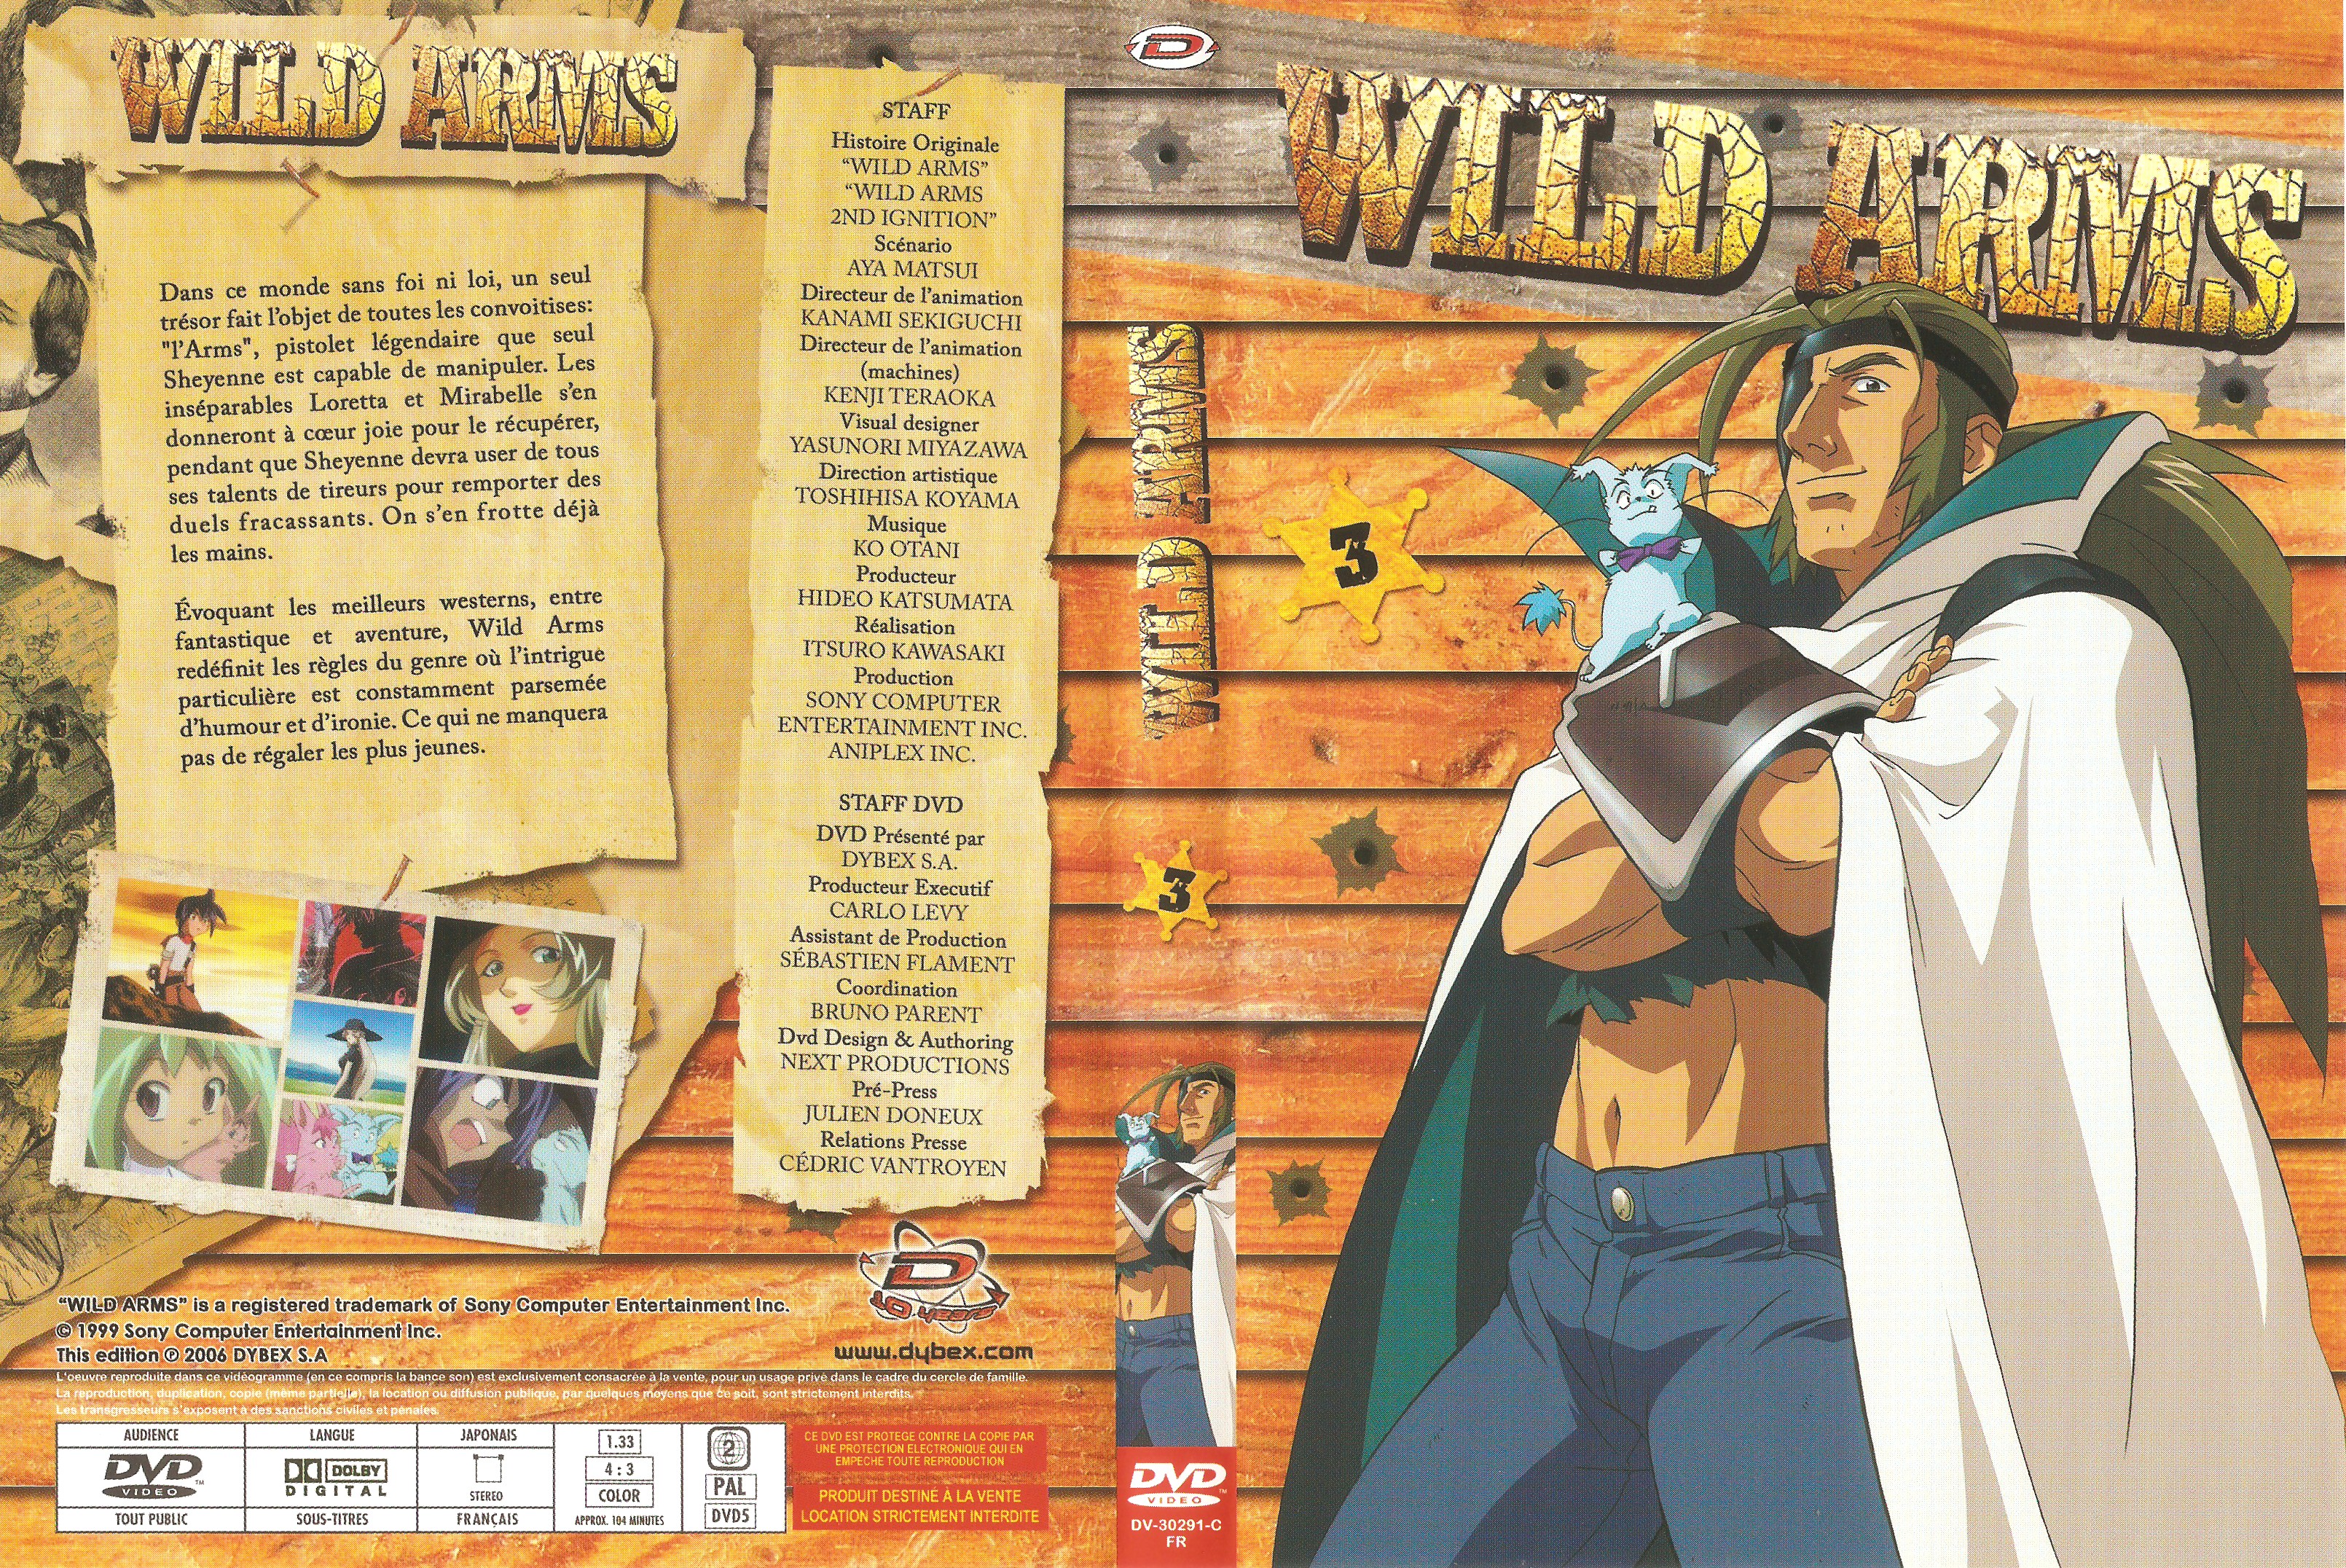 Jaquette DVD Wild Arms vol 3